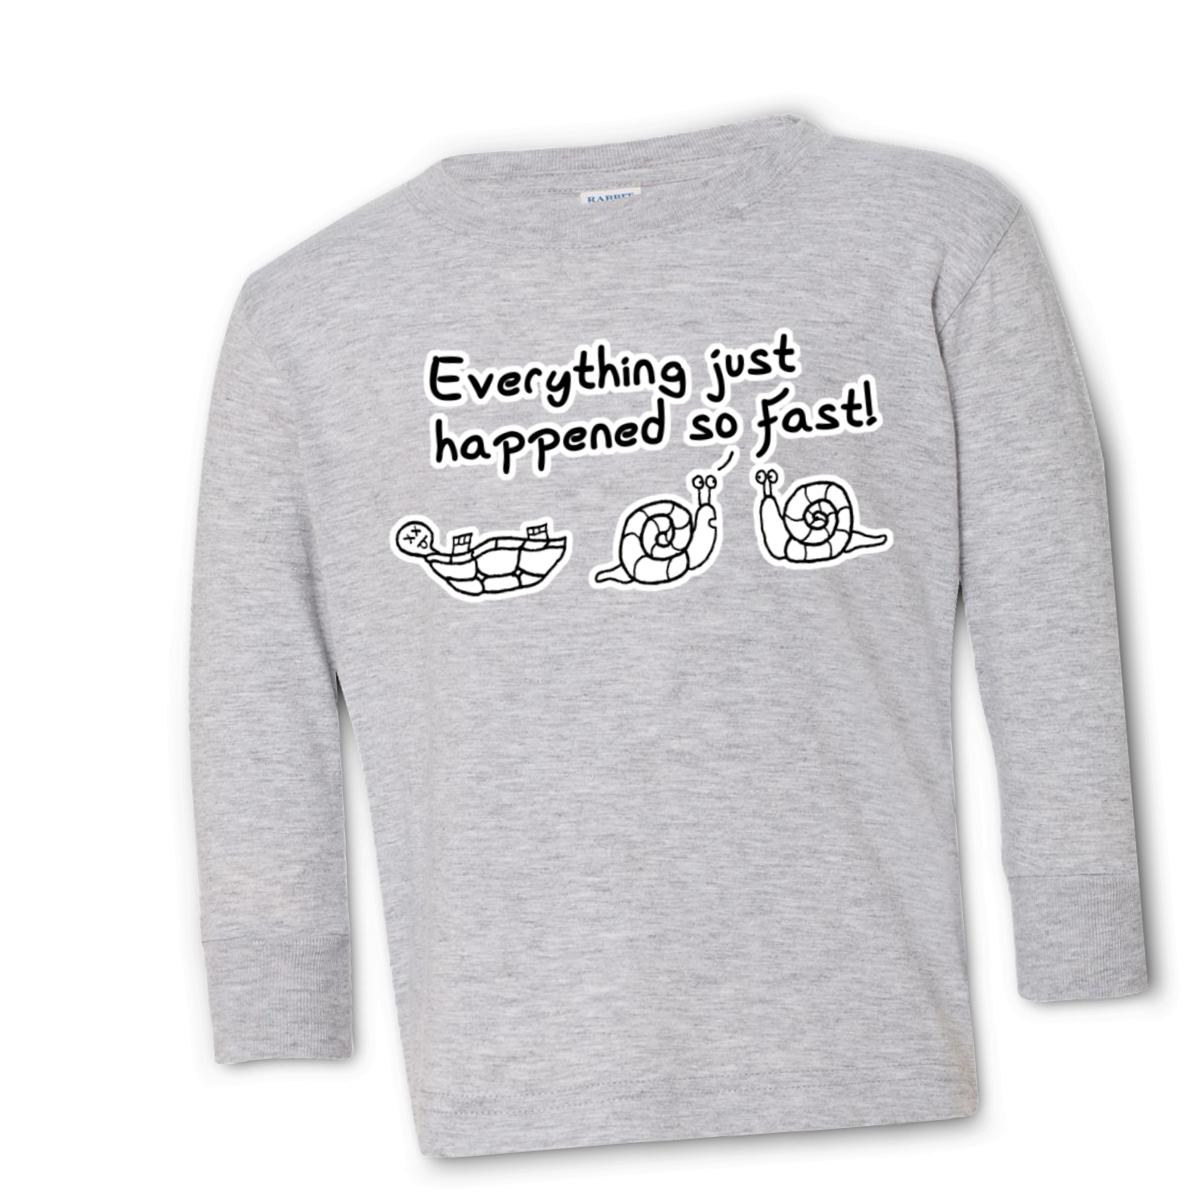 Happened So Fast Toddler Long Sleeve Tee 2T heather